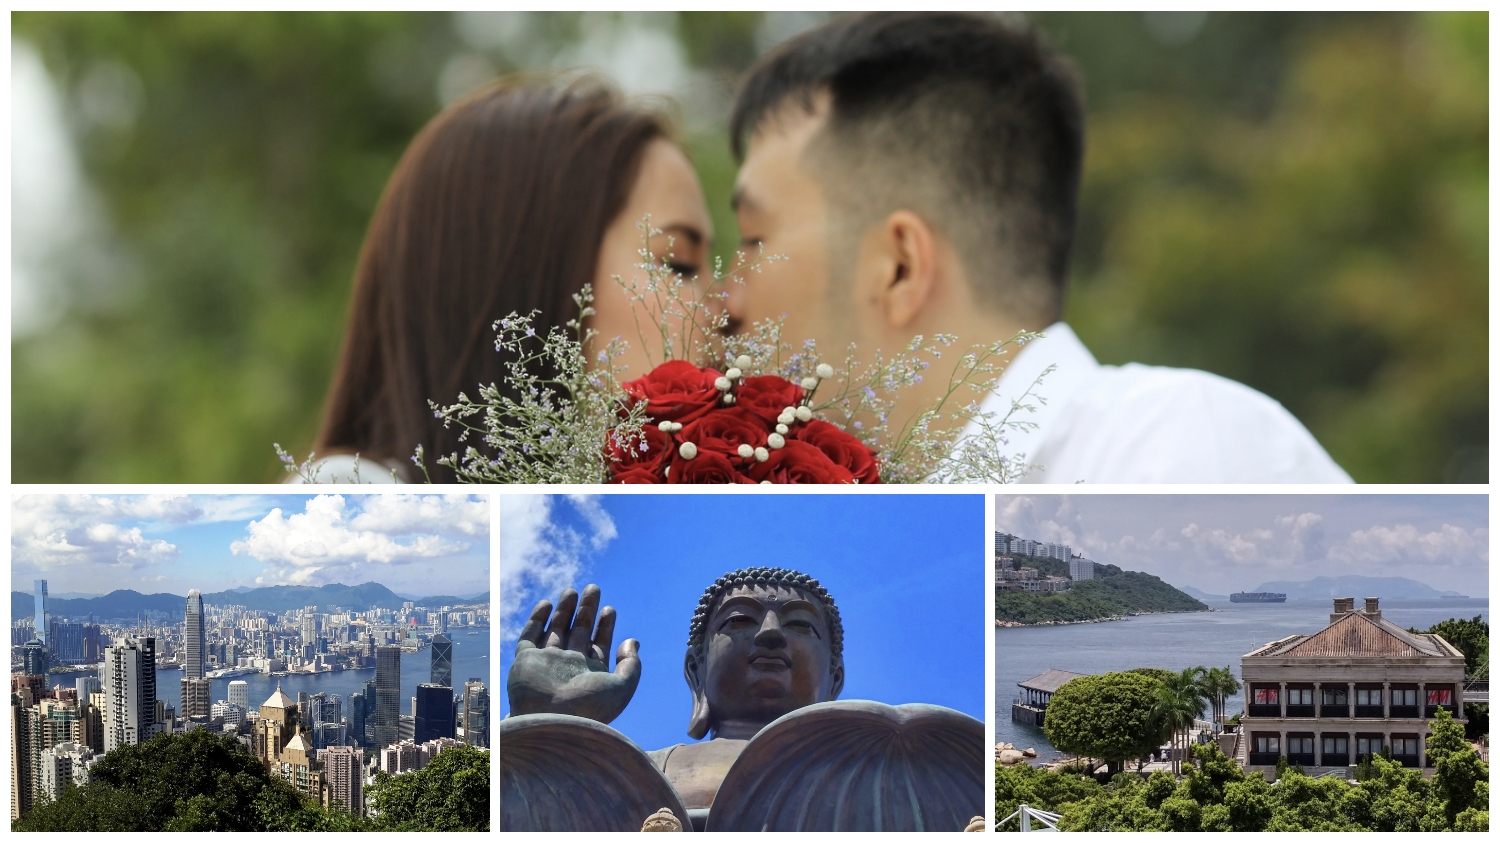 Hong Kong private tours help Singapore honeymooners to tour Hong Kong safely under travel bubble